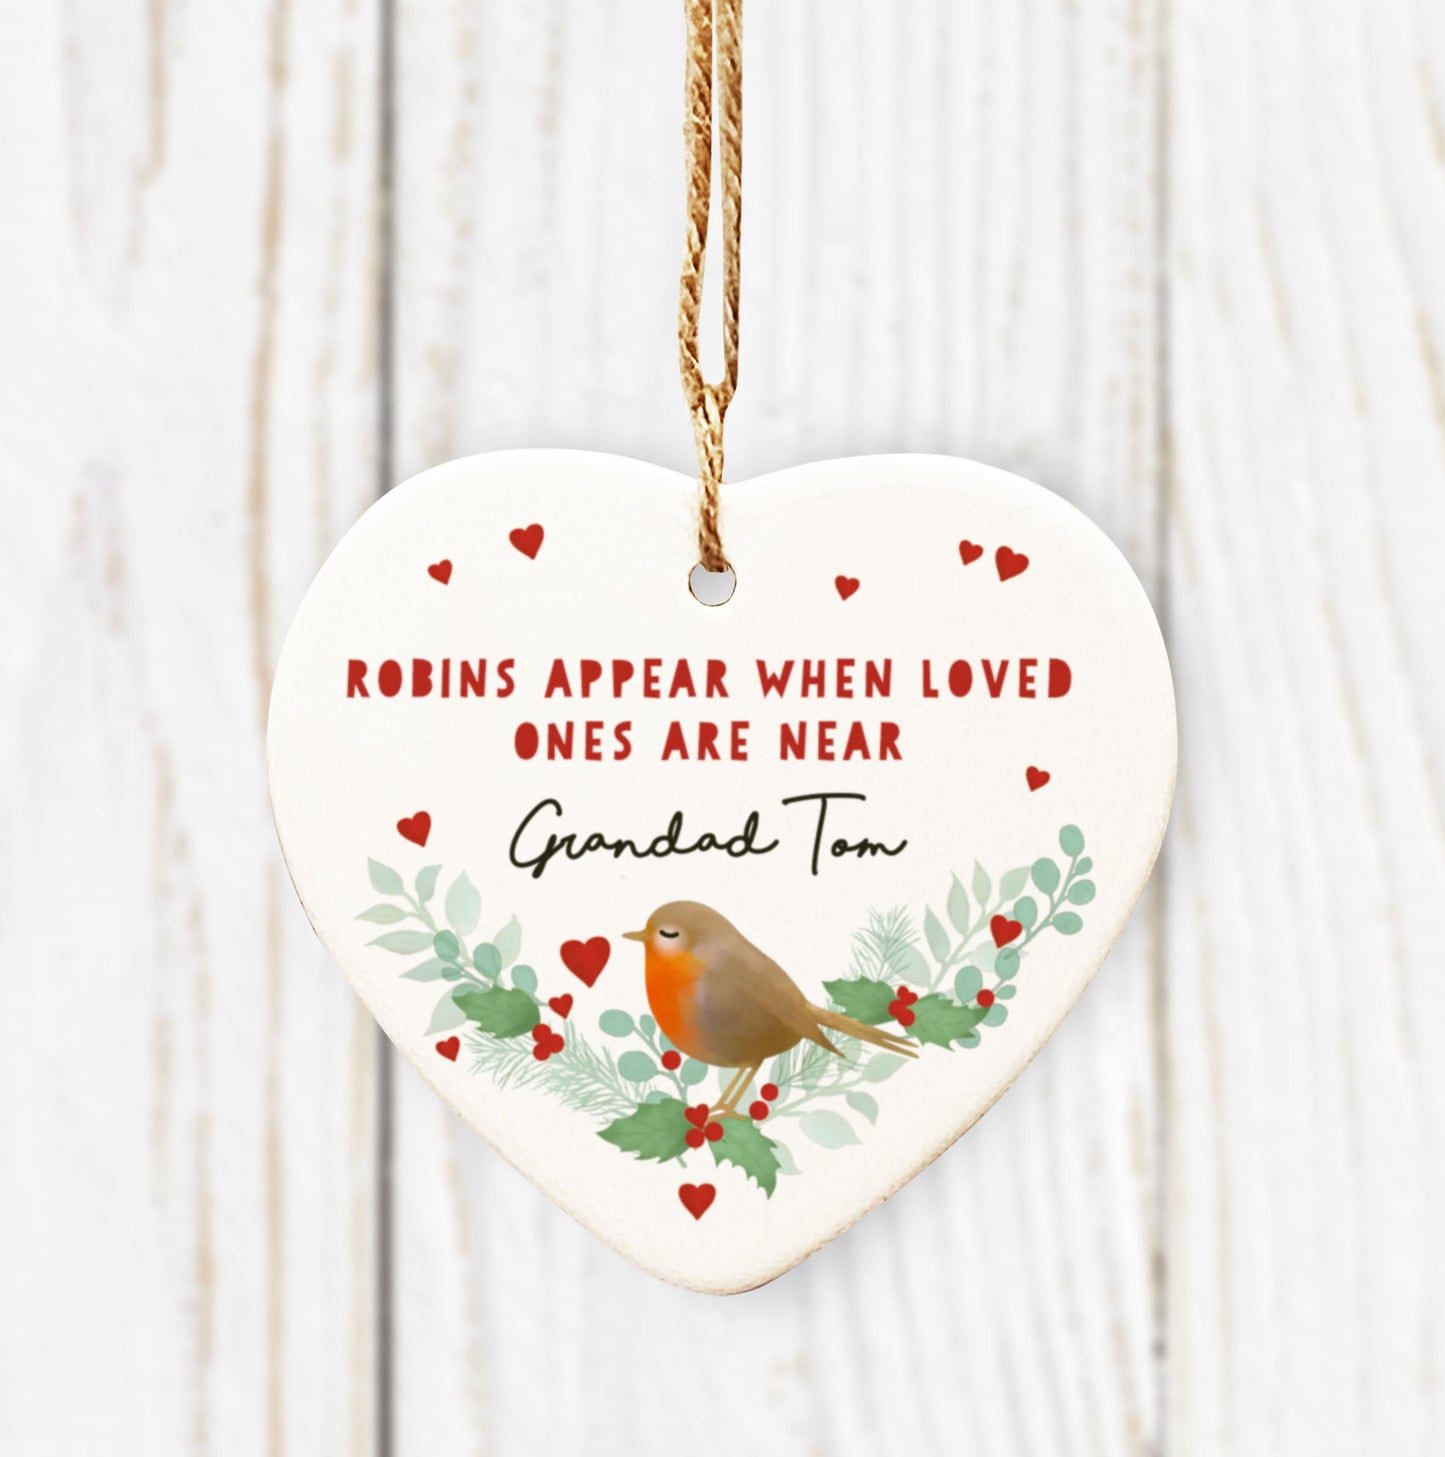 Robins Appear When Loved Ones Are Near Heart. Remembrance Ornament. Personalised In Loving Memory Tree Decoration.Personalised Tree Bauble